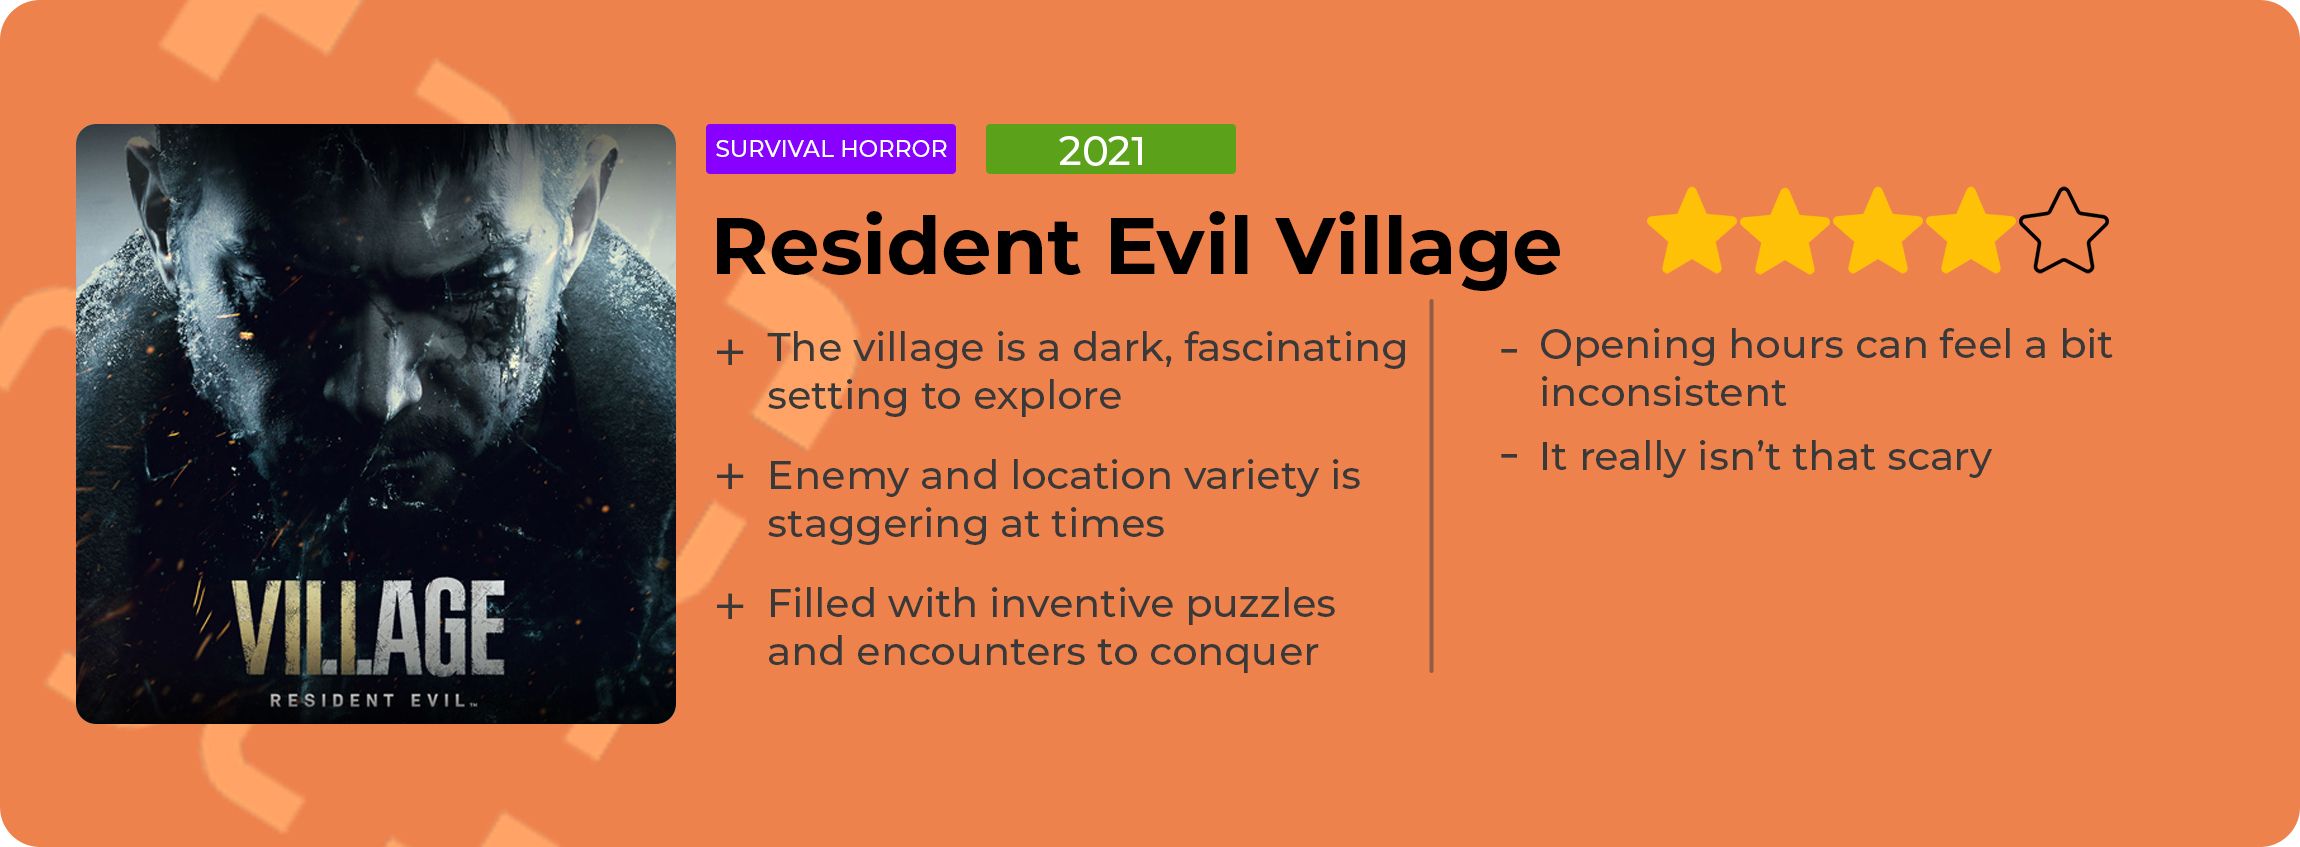 Resident Evil Village Review: A Bold Homage To The 2005 Classic